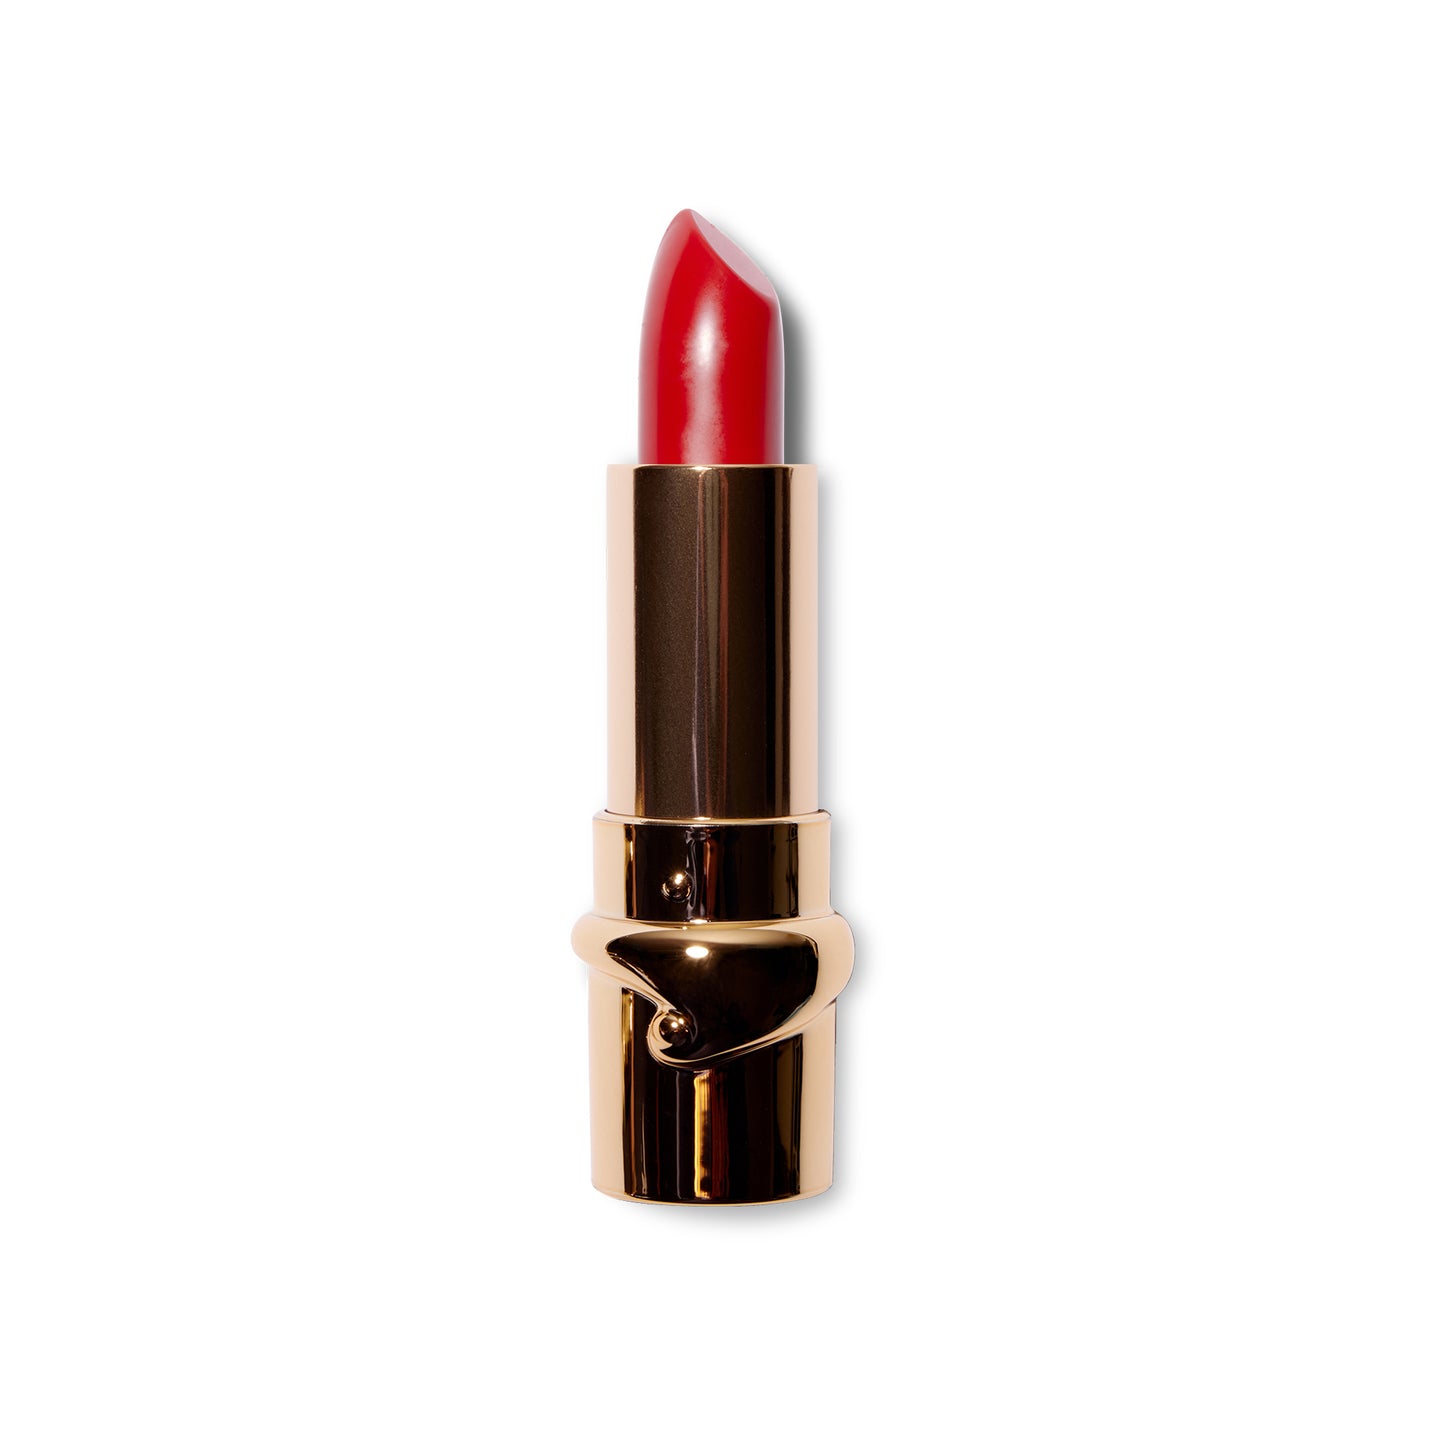 The Julie Hewlett matte Noir lipstick in Rouge is wound up and the bullet is visible in the gold component. 